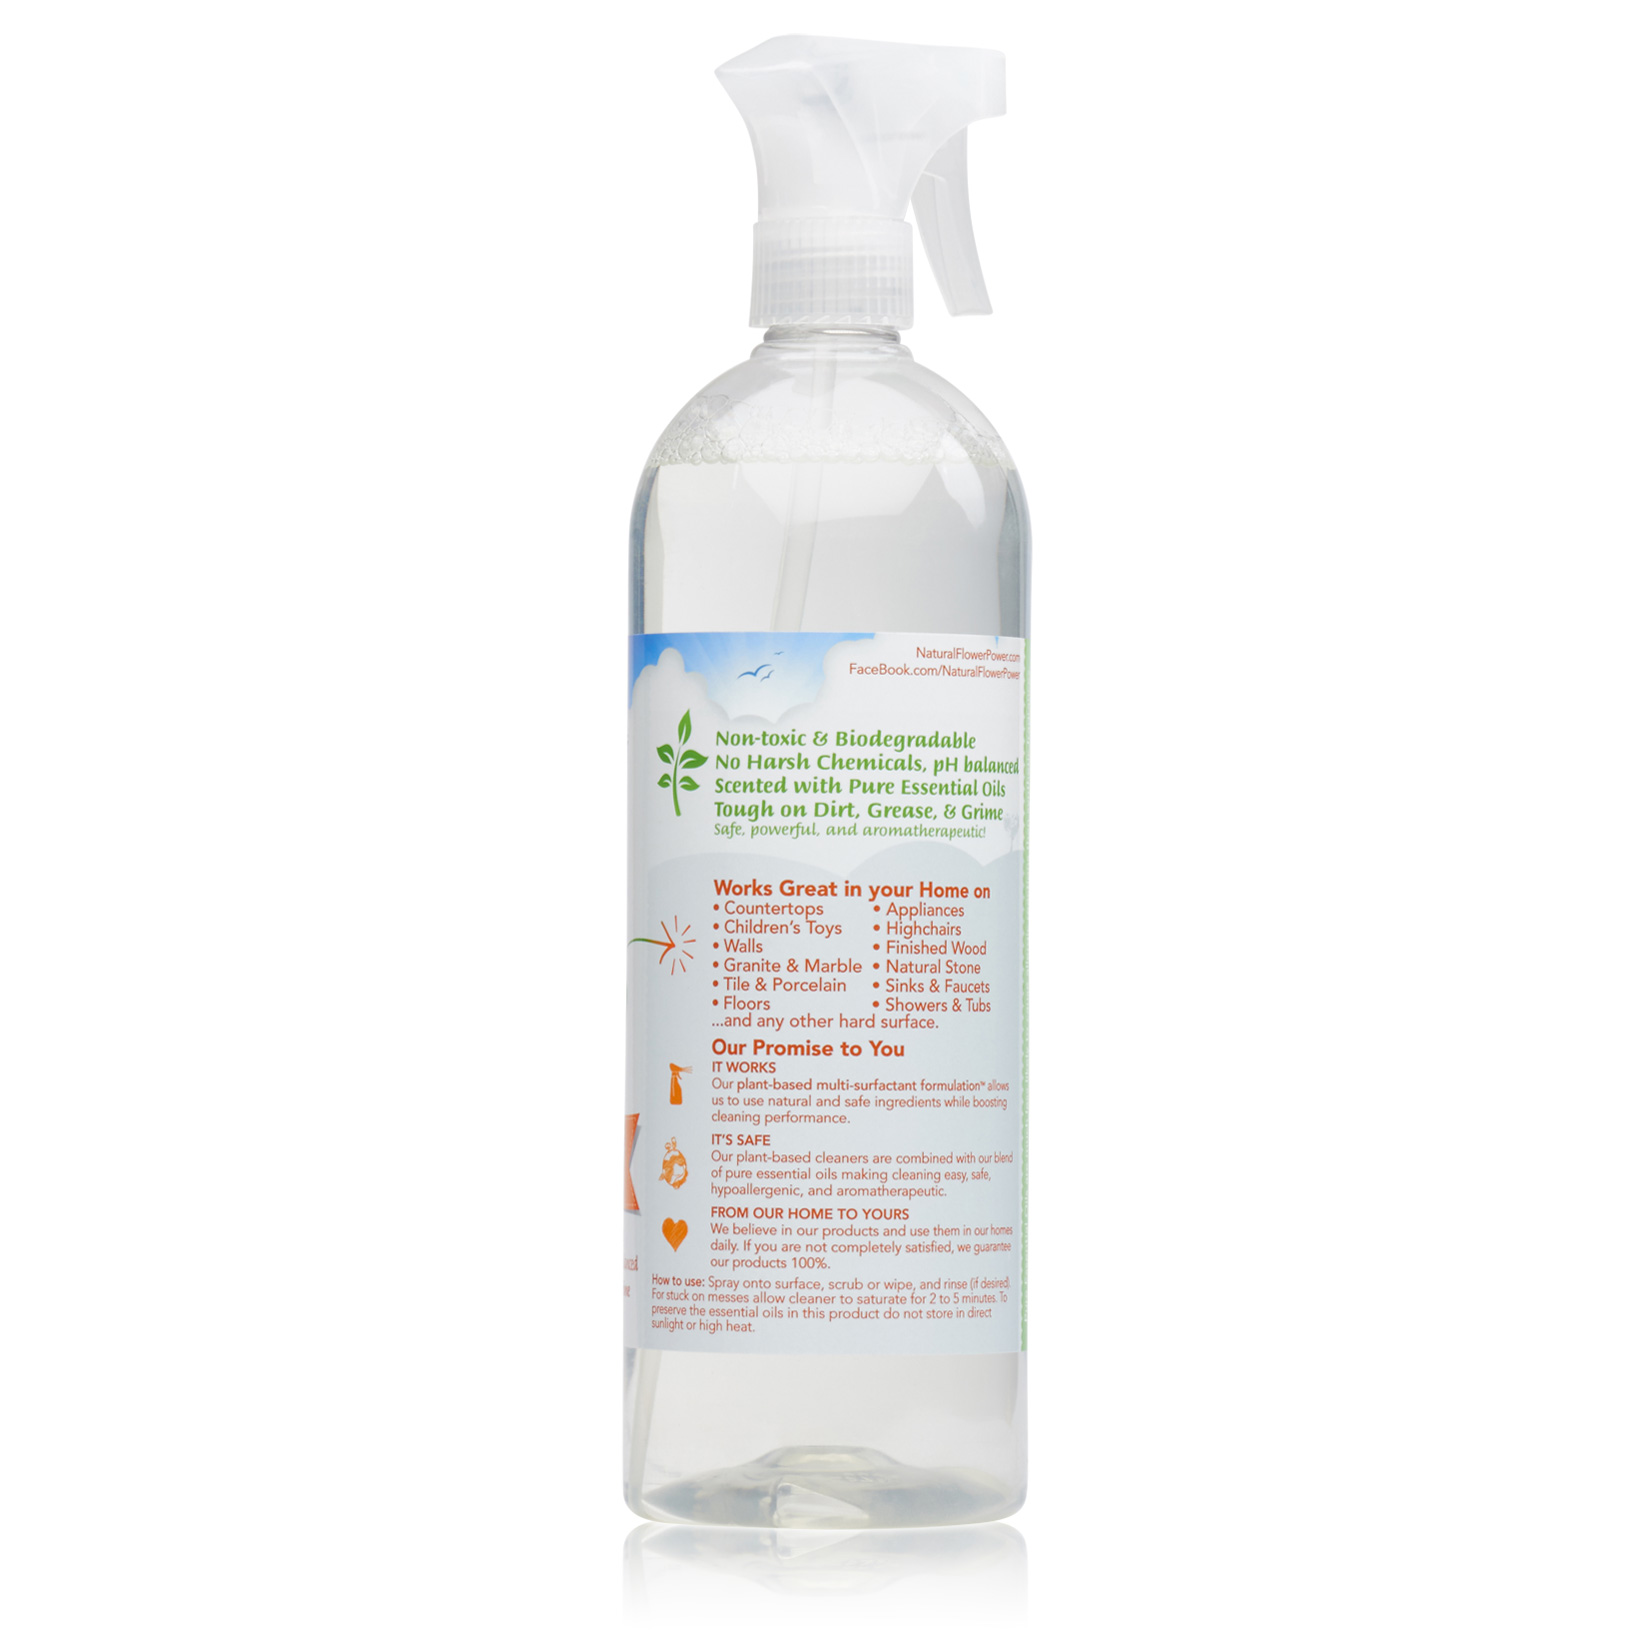 ns.productsocialmetatags:resources.openGraphTitle  Multipurpose cleaner,  Cleaners, Cleaning appliances